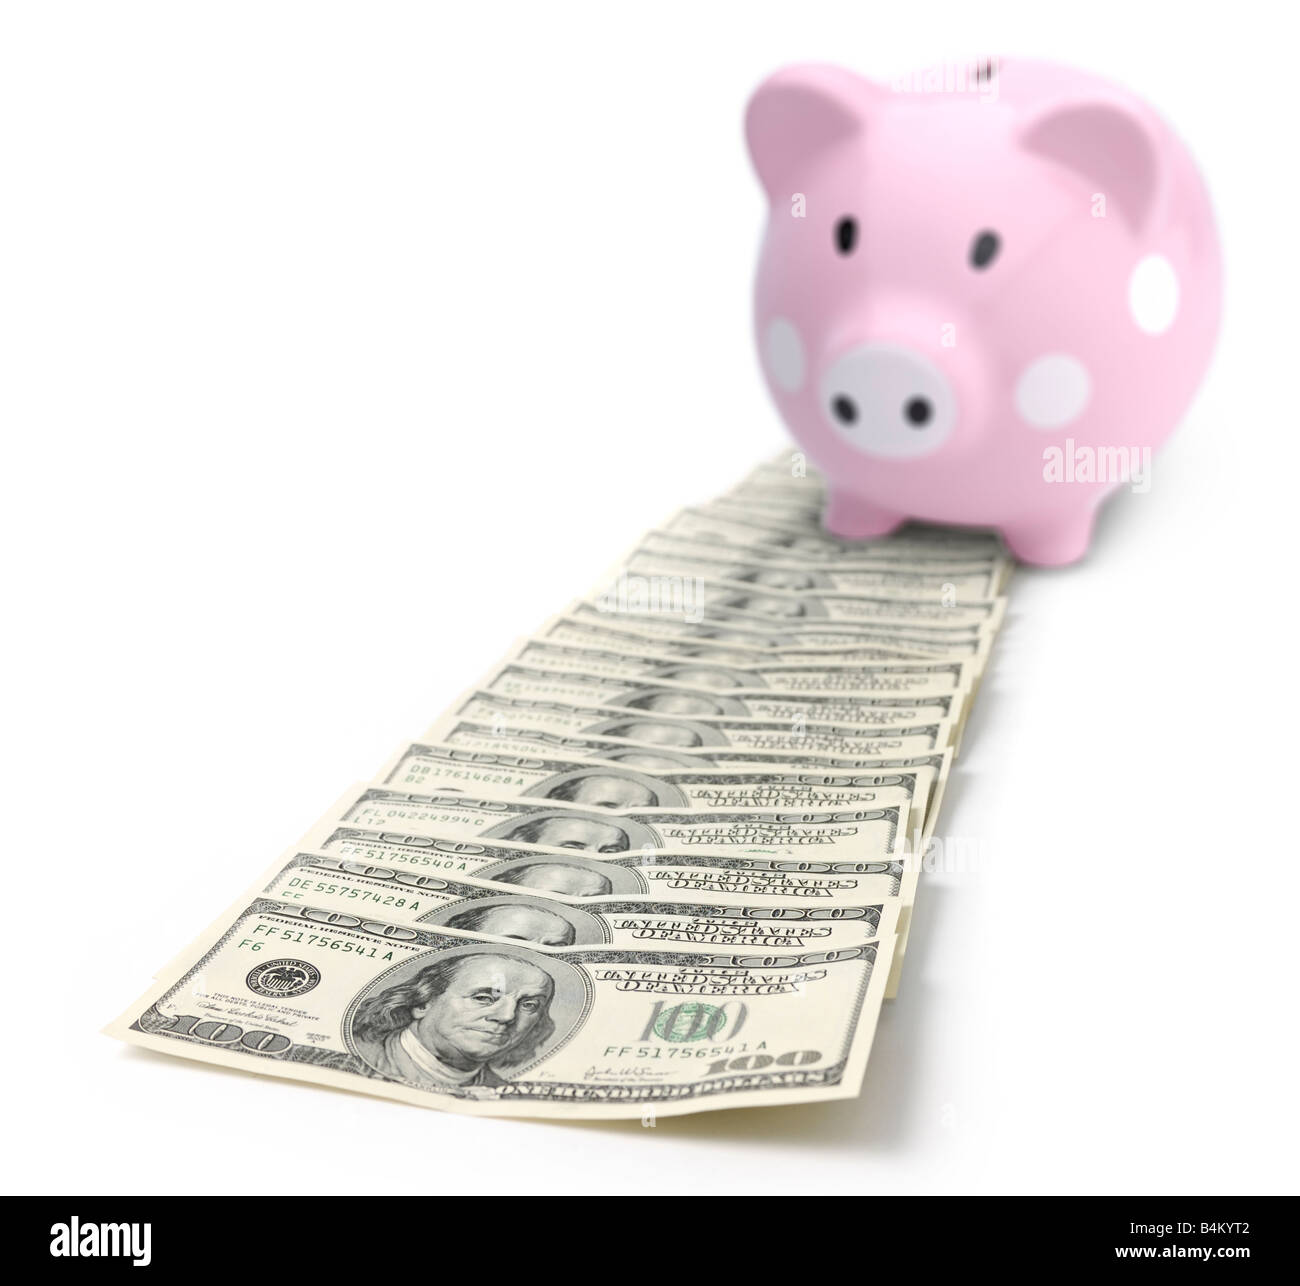 Piggy bank on a pile of money Stock Photo